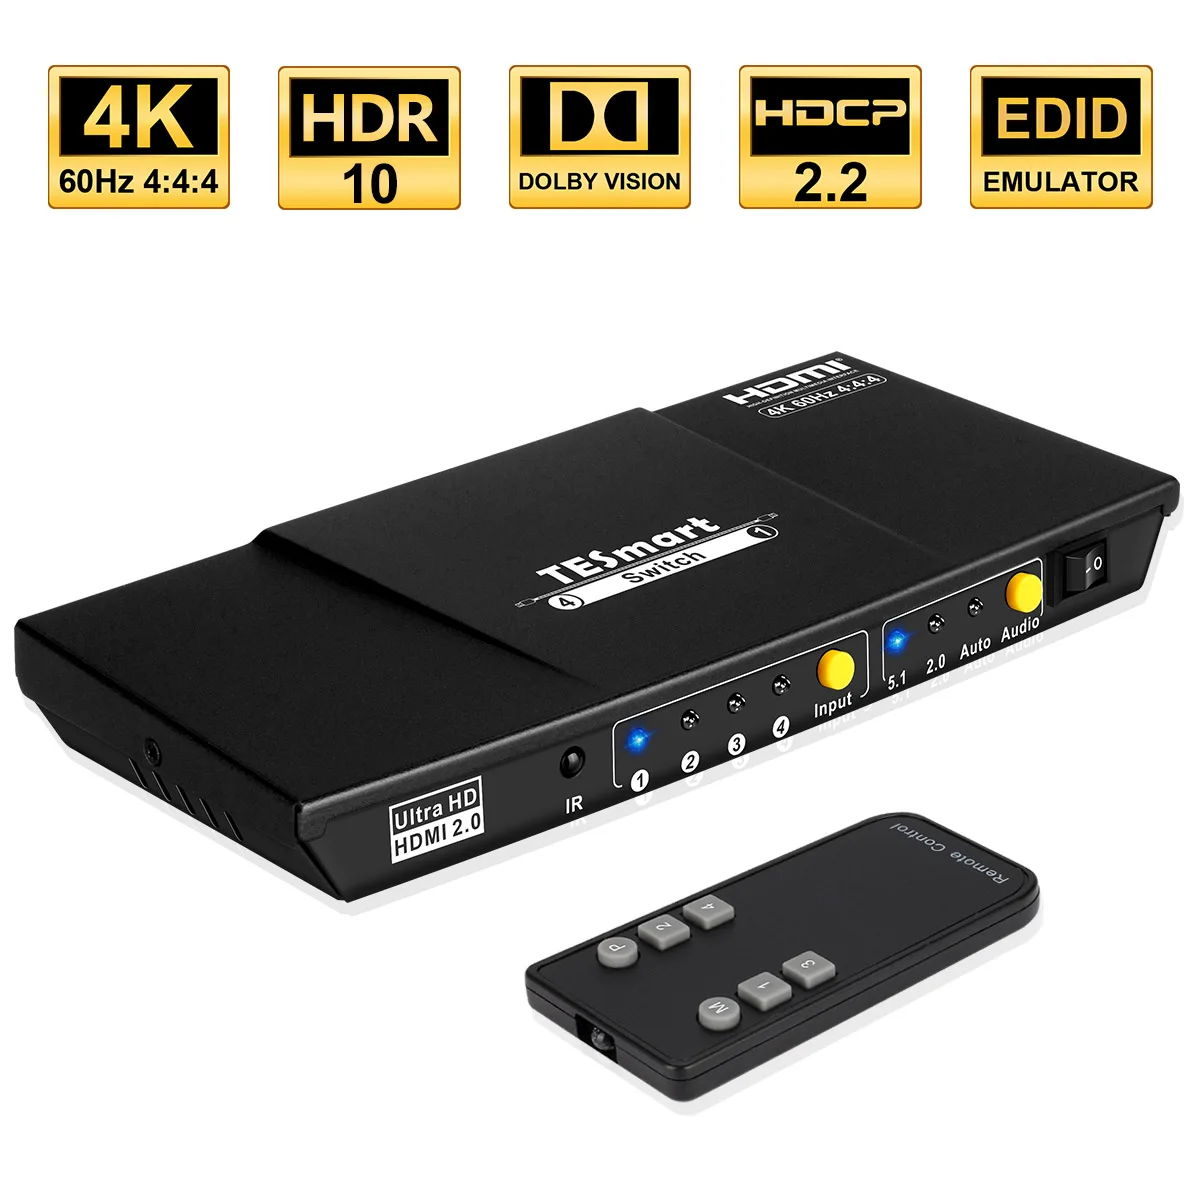 TESmart 4x1 HDMI Switch 4K@60Hz Switch HDCP High quality with Remote Control for HDTV Audio Video XBOX DVD STB